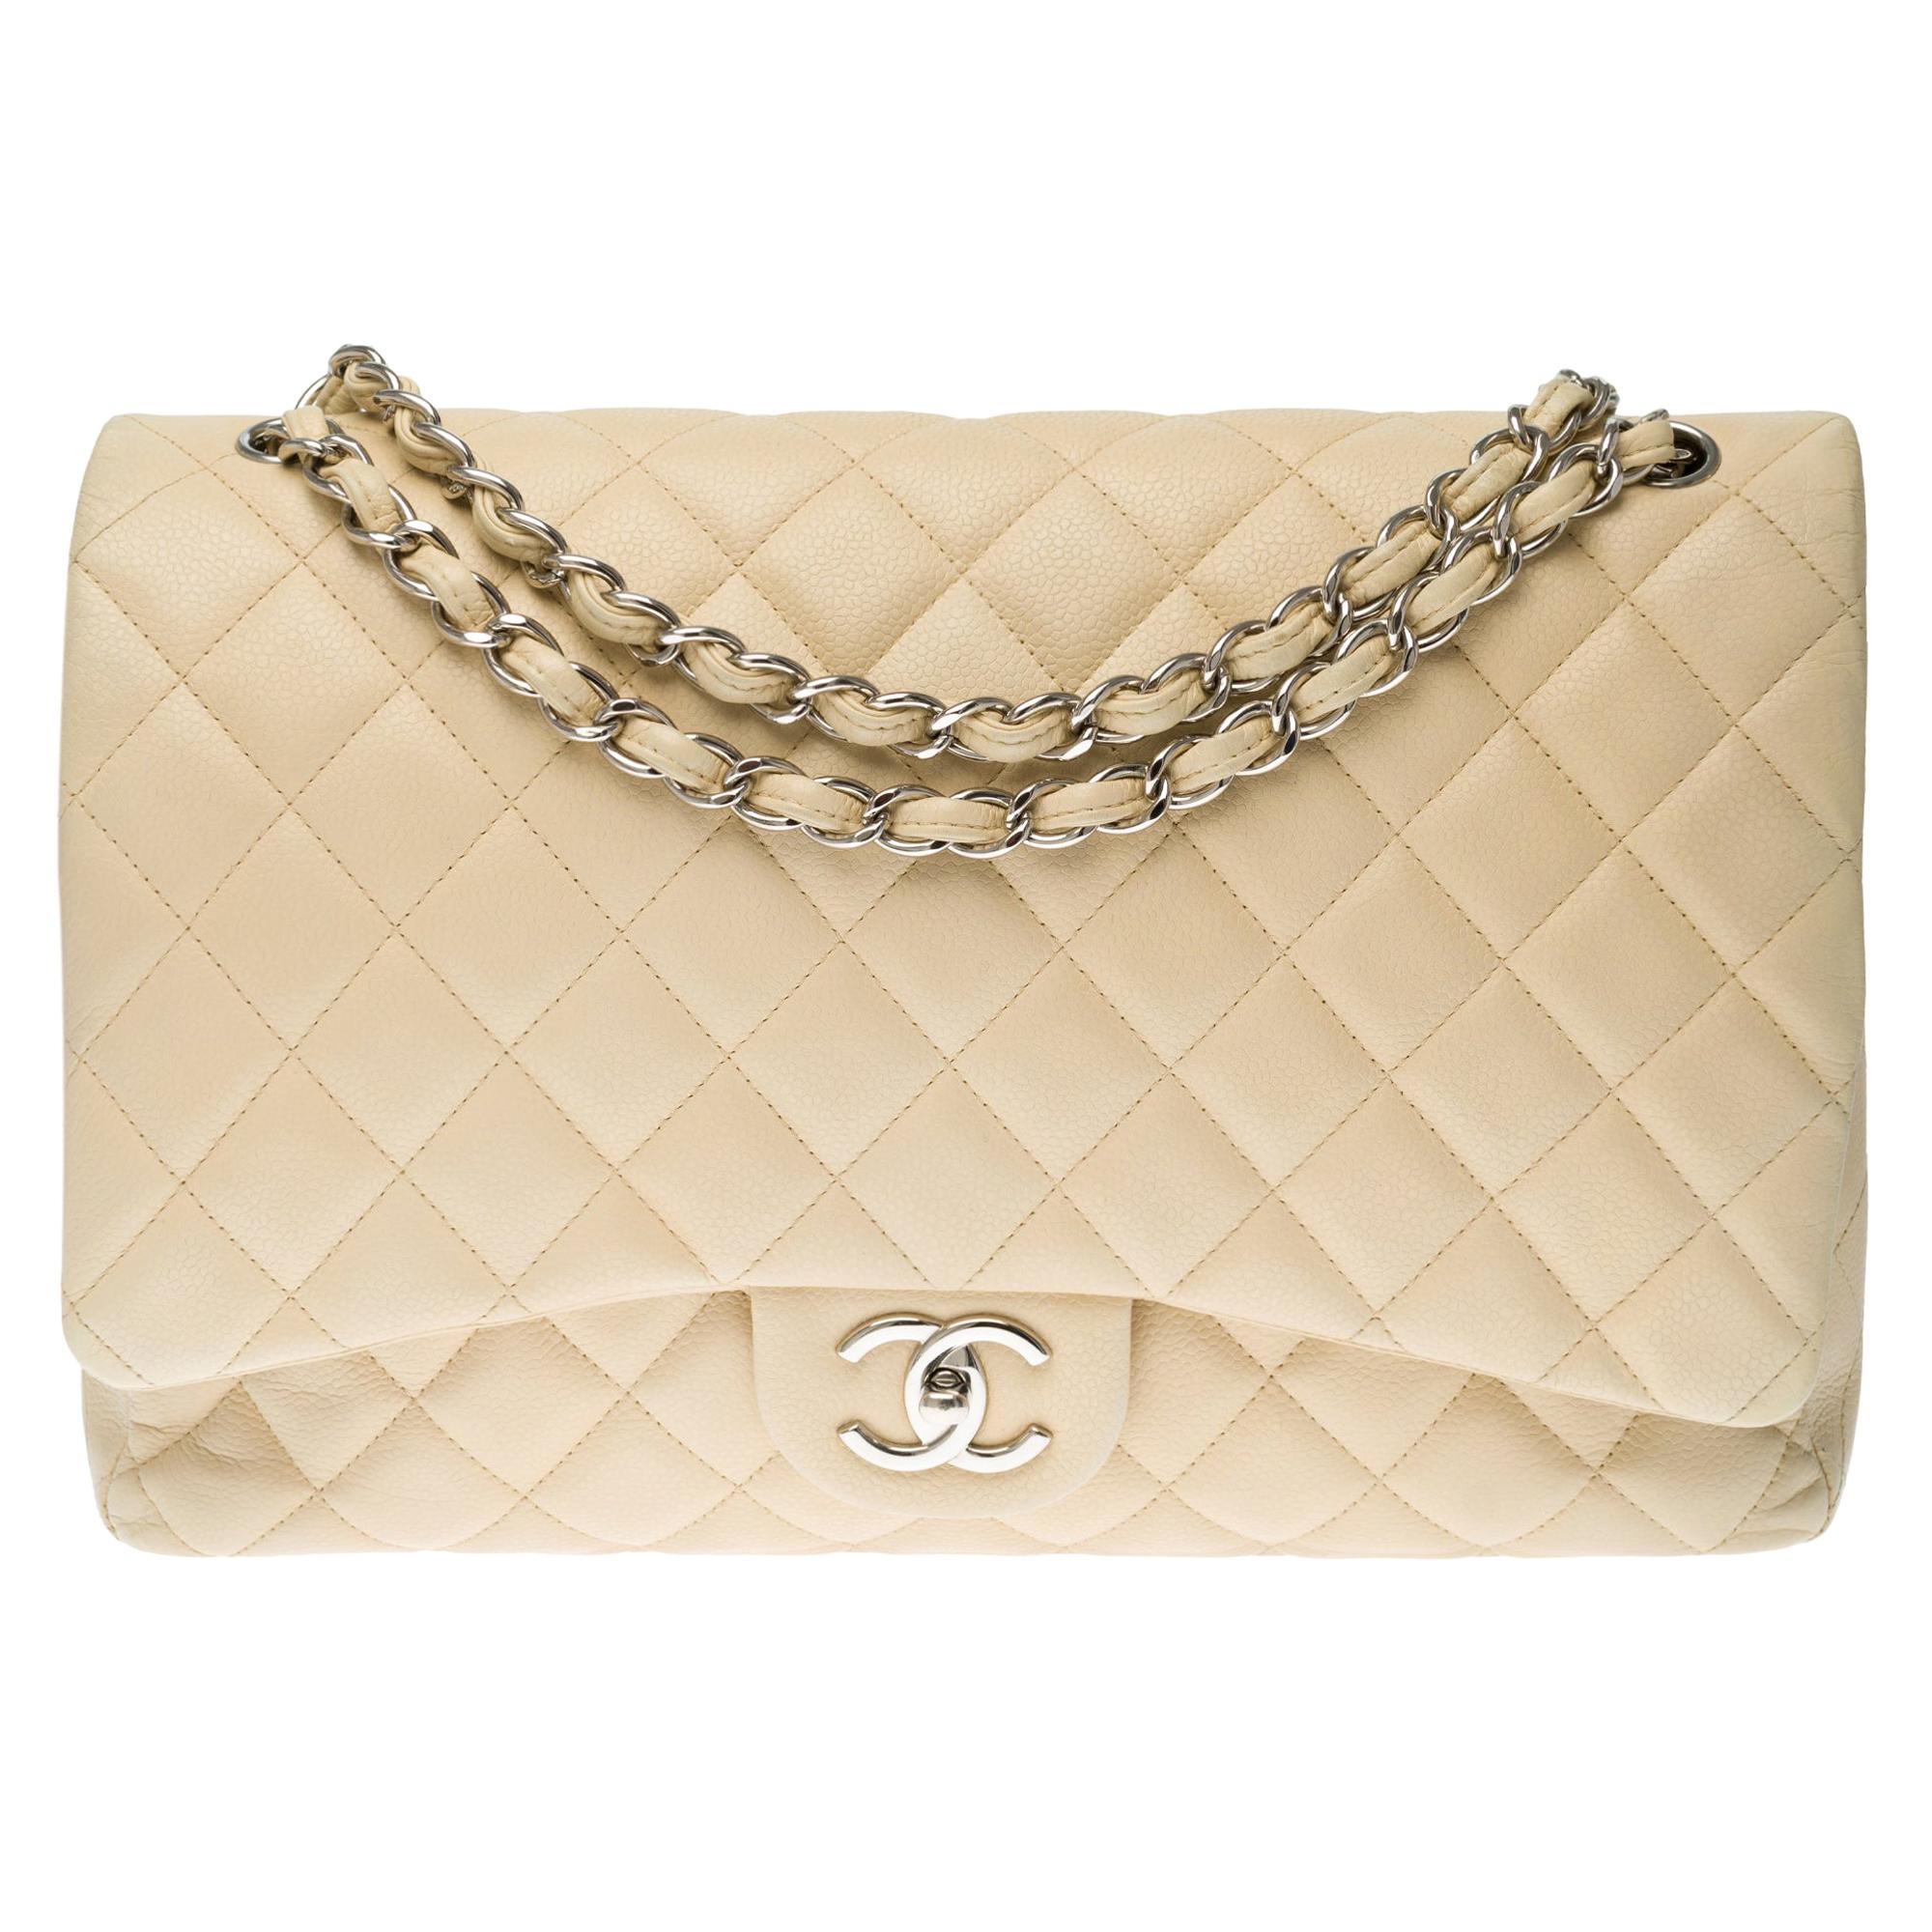 Chanel Timeless Maxi Jumbo shoulder bag in beige quilted caviar leather, SHW